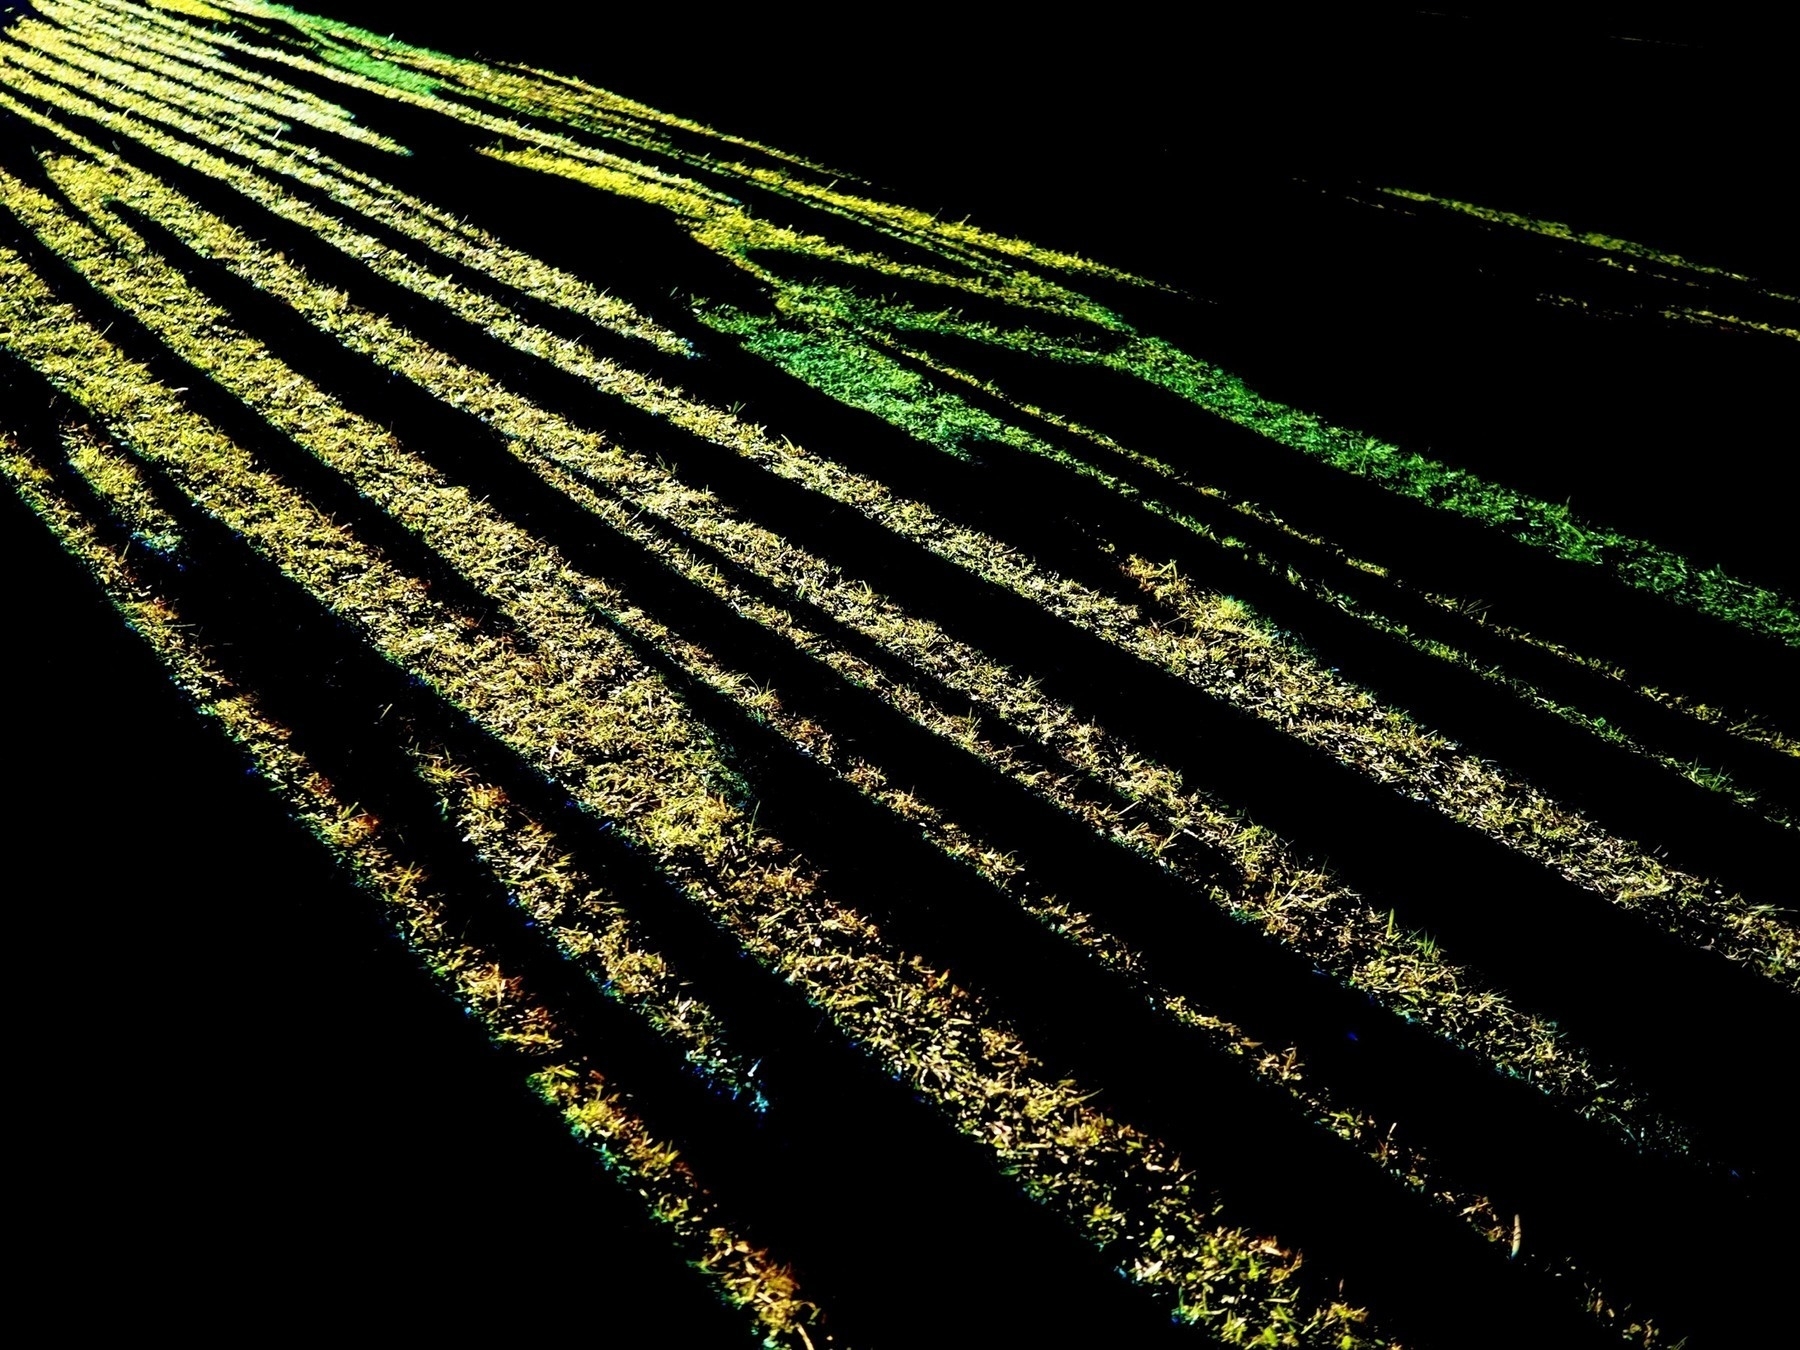 Curved beams of light on grass at night